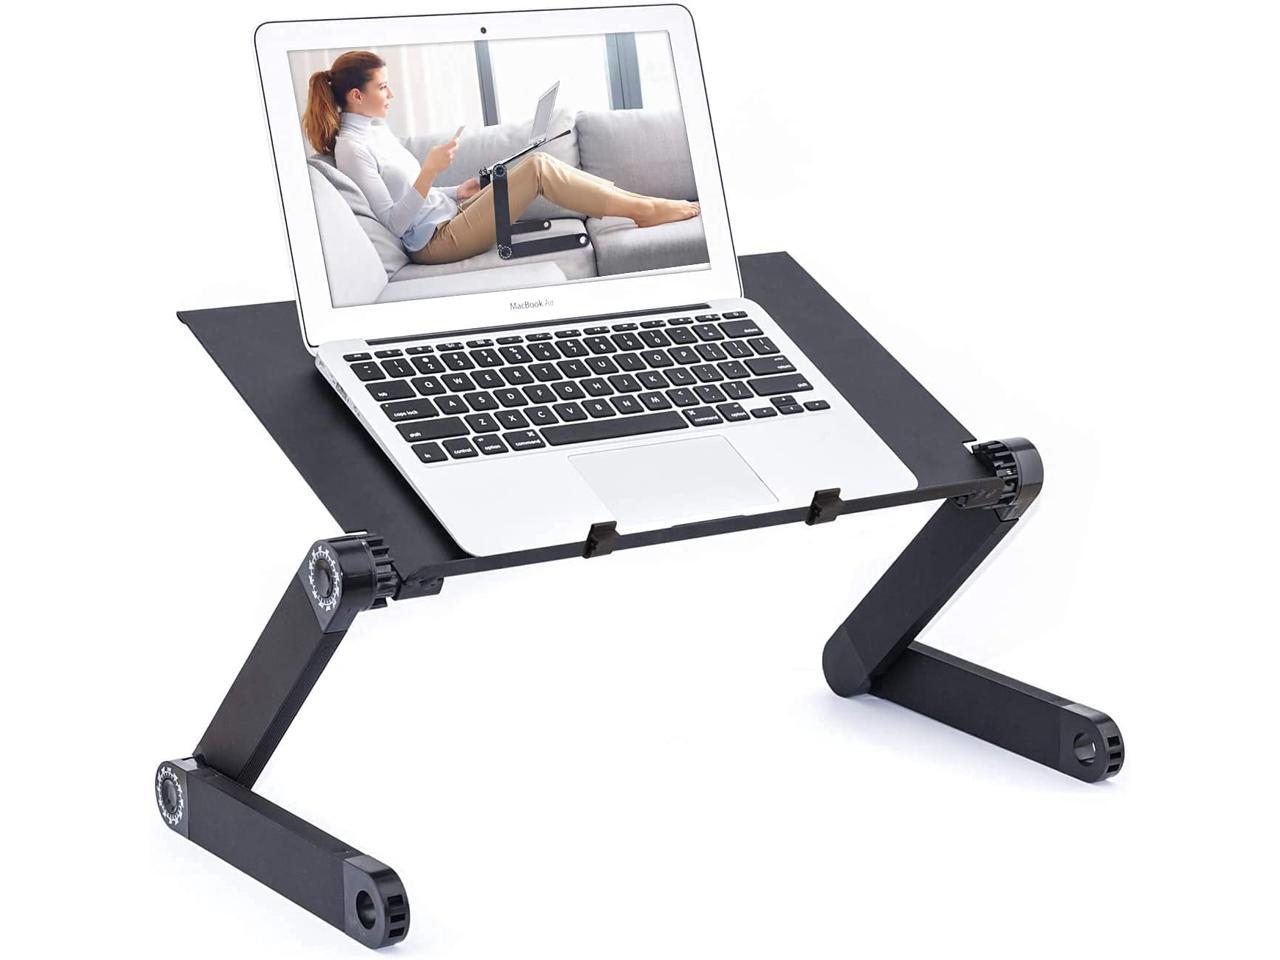 Adjustable Laptop Stand Holder for Desk,Table/Ergonomic Laptop Computer Stand/Laptop Riser/Laptop Workstation Notebook Stand Reading Holder with 2 Baffles and Mouse Pad in Bed Couch Office Sofa 